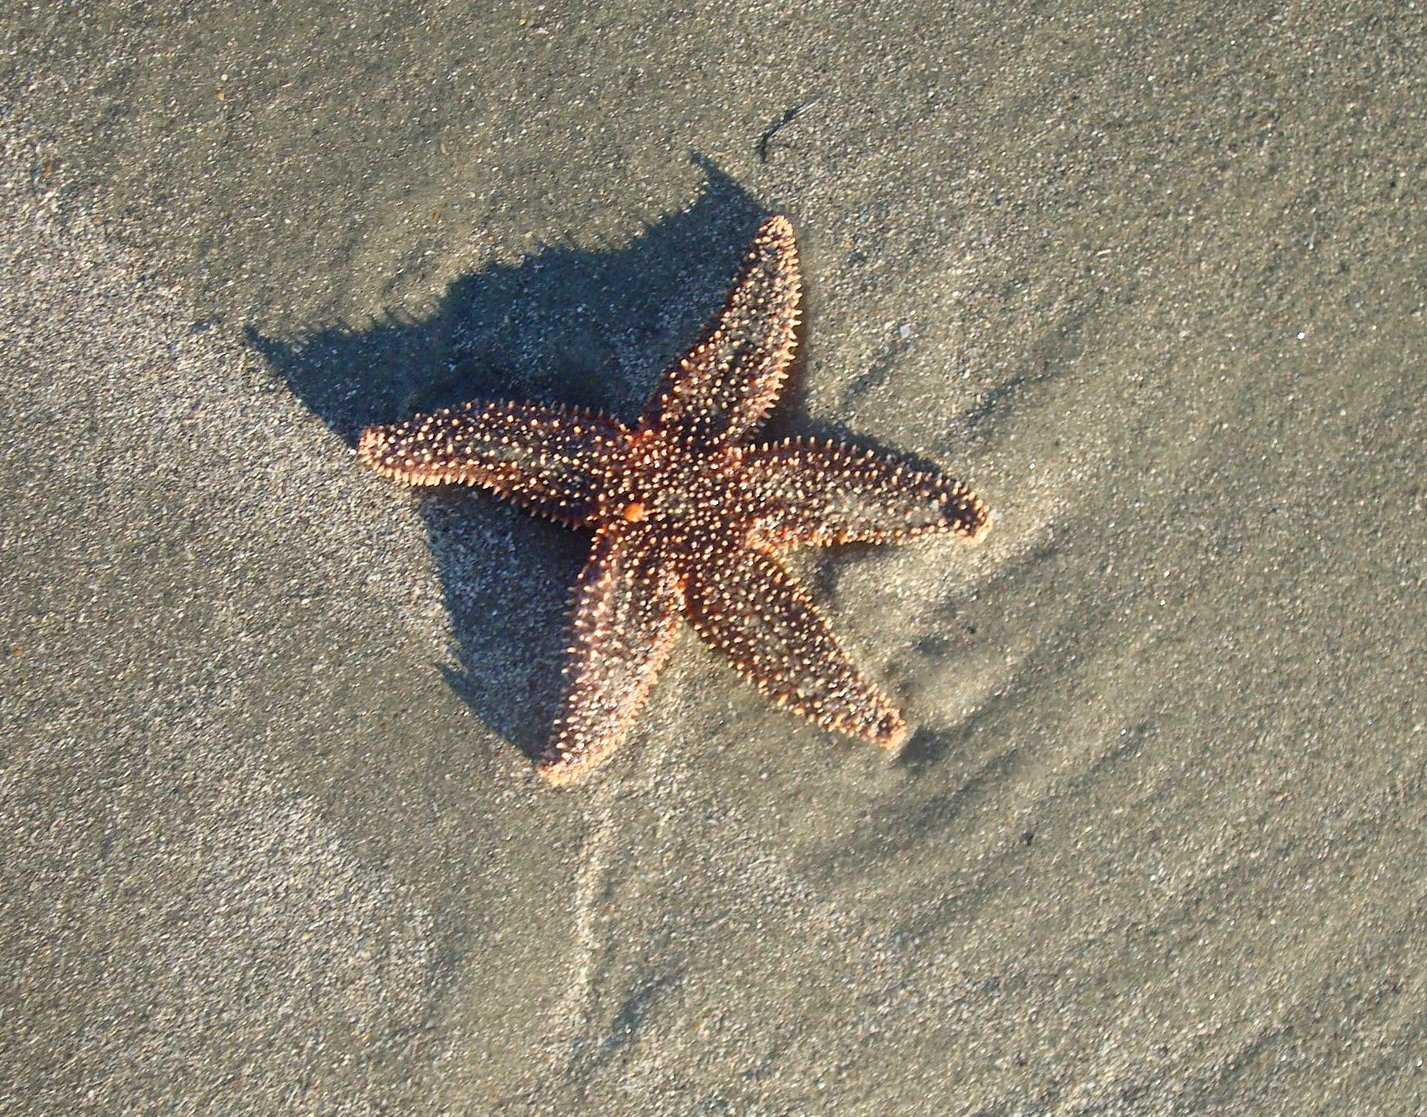 One of many shriveled sea stars that inspired this poem. This poem is also based on true events during the winter holidays.